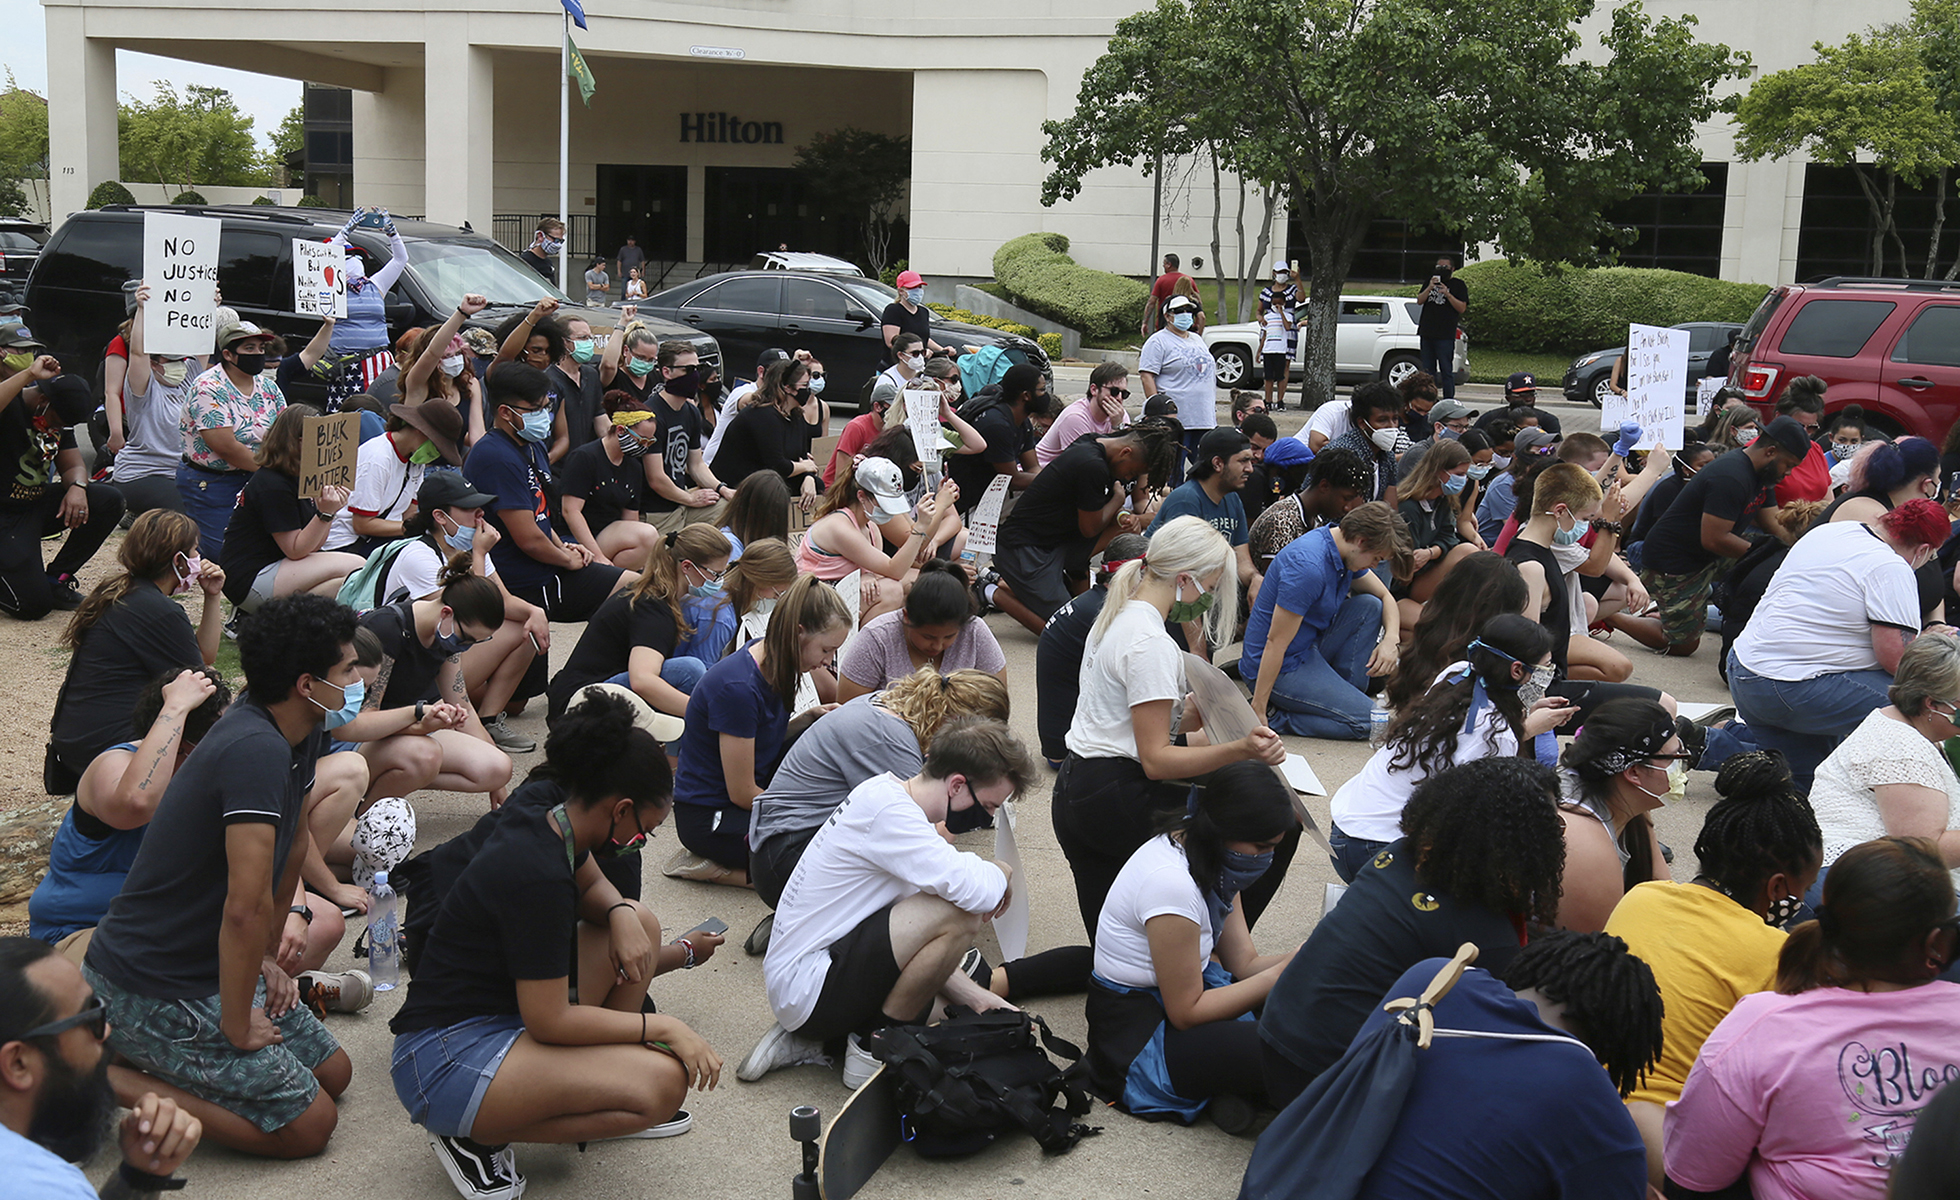 Protesters bow their heads during a local civil advocates rally in Waco, Texas, Sunday, May 31, 2020, near the Waco Suspension Bridge, to join in a peaceful protest after the death of George Floyd in Minneapolis last week. About 450 demonstrators chanted for racial equality, justice and the end of police brutality. (Rod Aydelotte/Waco Tribune Herald, via AP)